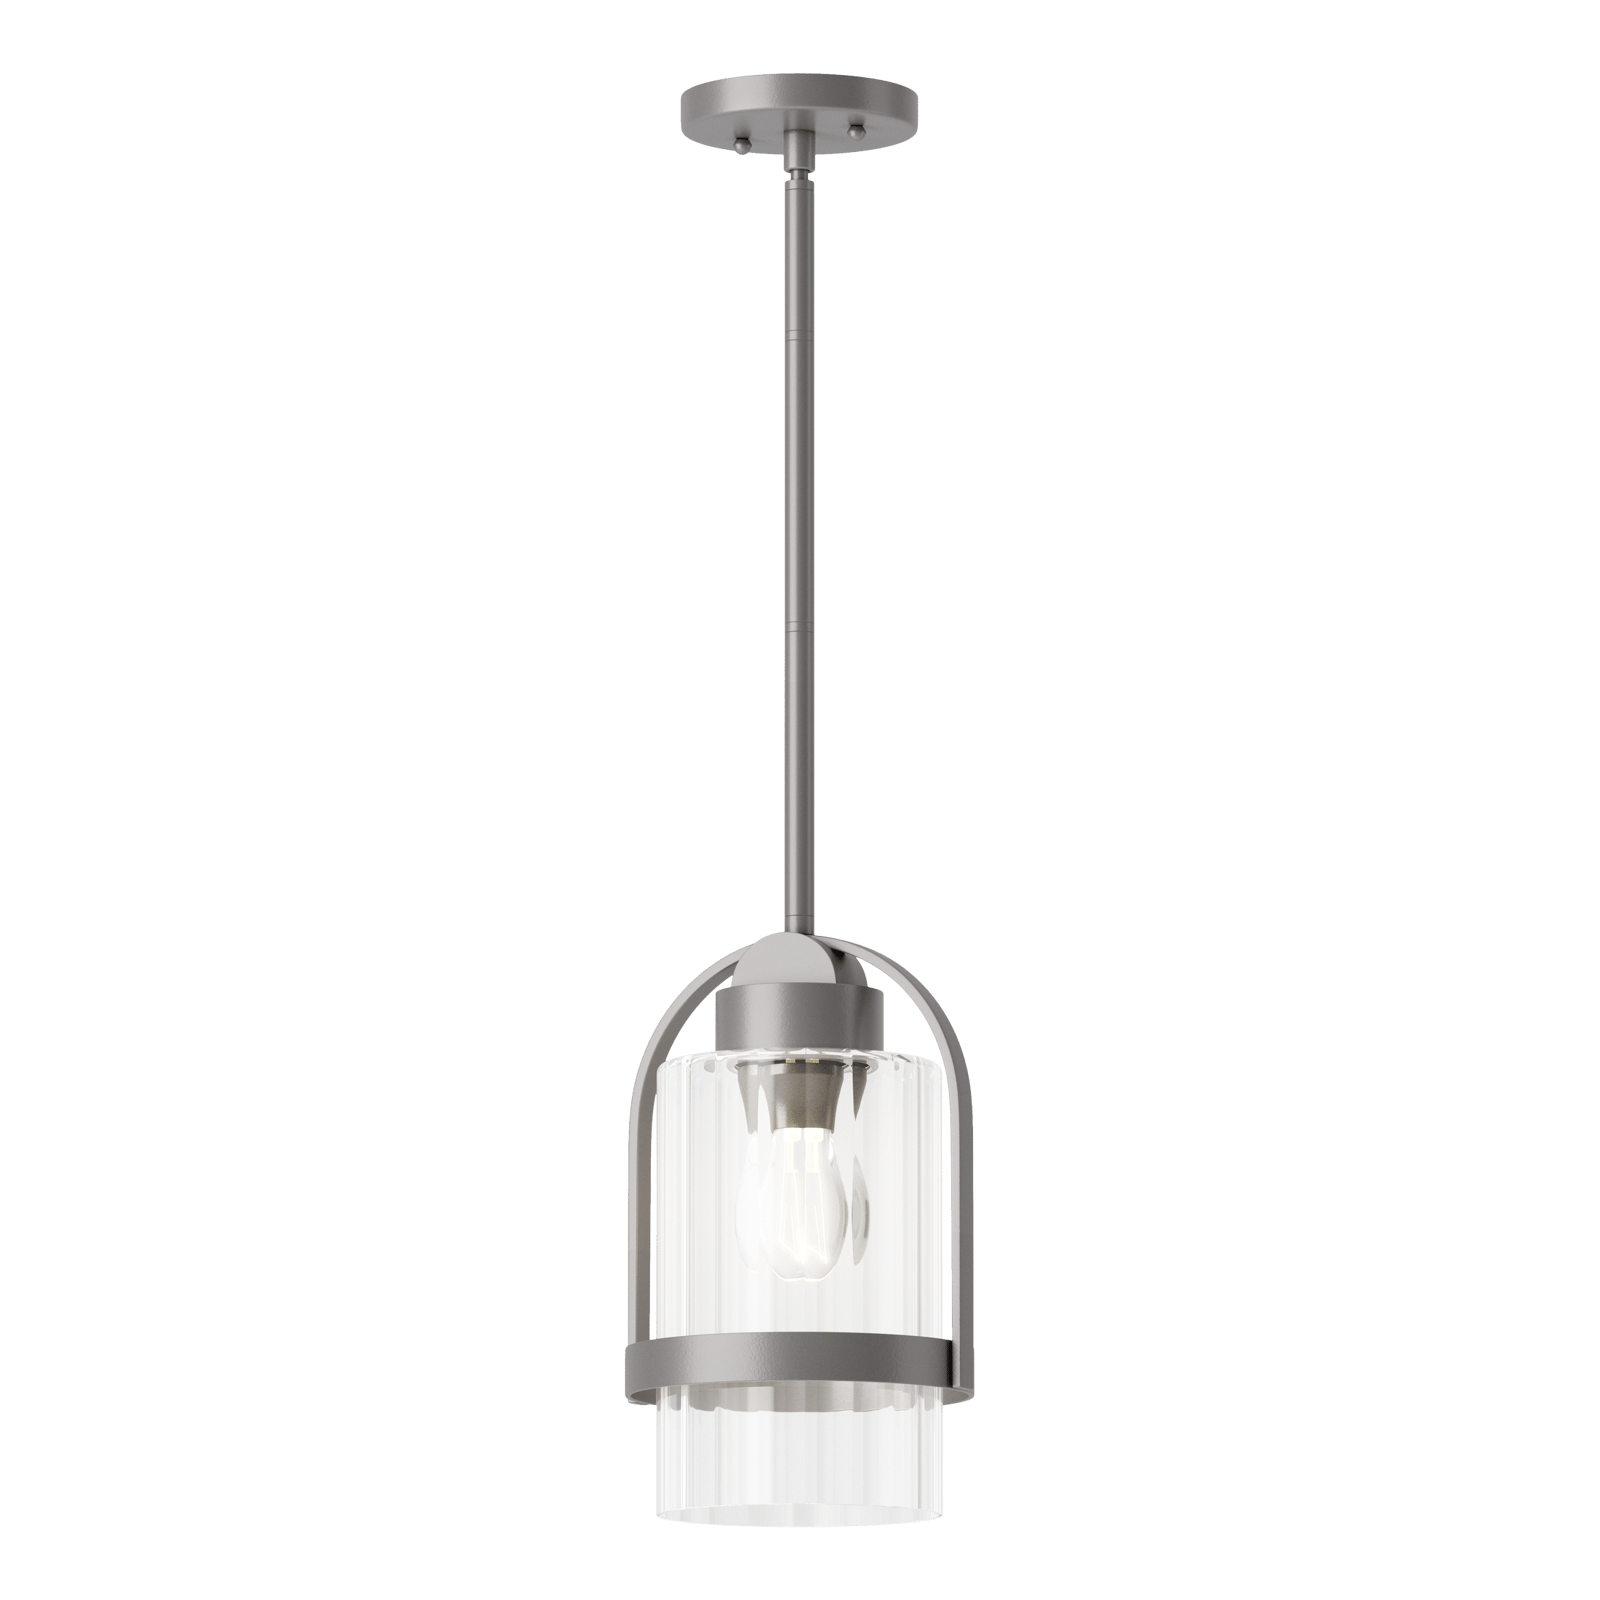 Hubbardton Forge Alcove Outdoor Pendant Outdoor Light Fixture l Hanging Hubbardton Forge Coastal Burnished Steel Clear Glass (ZM) 